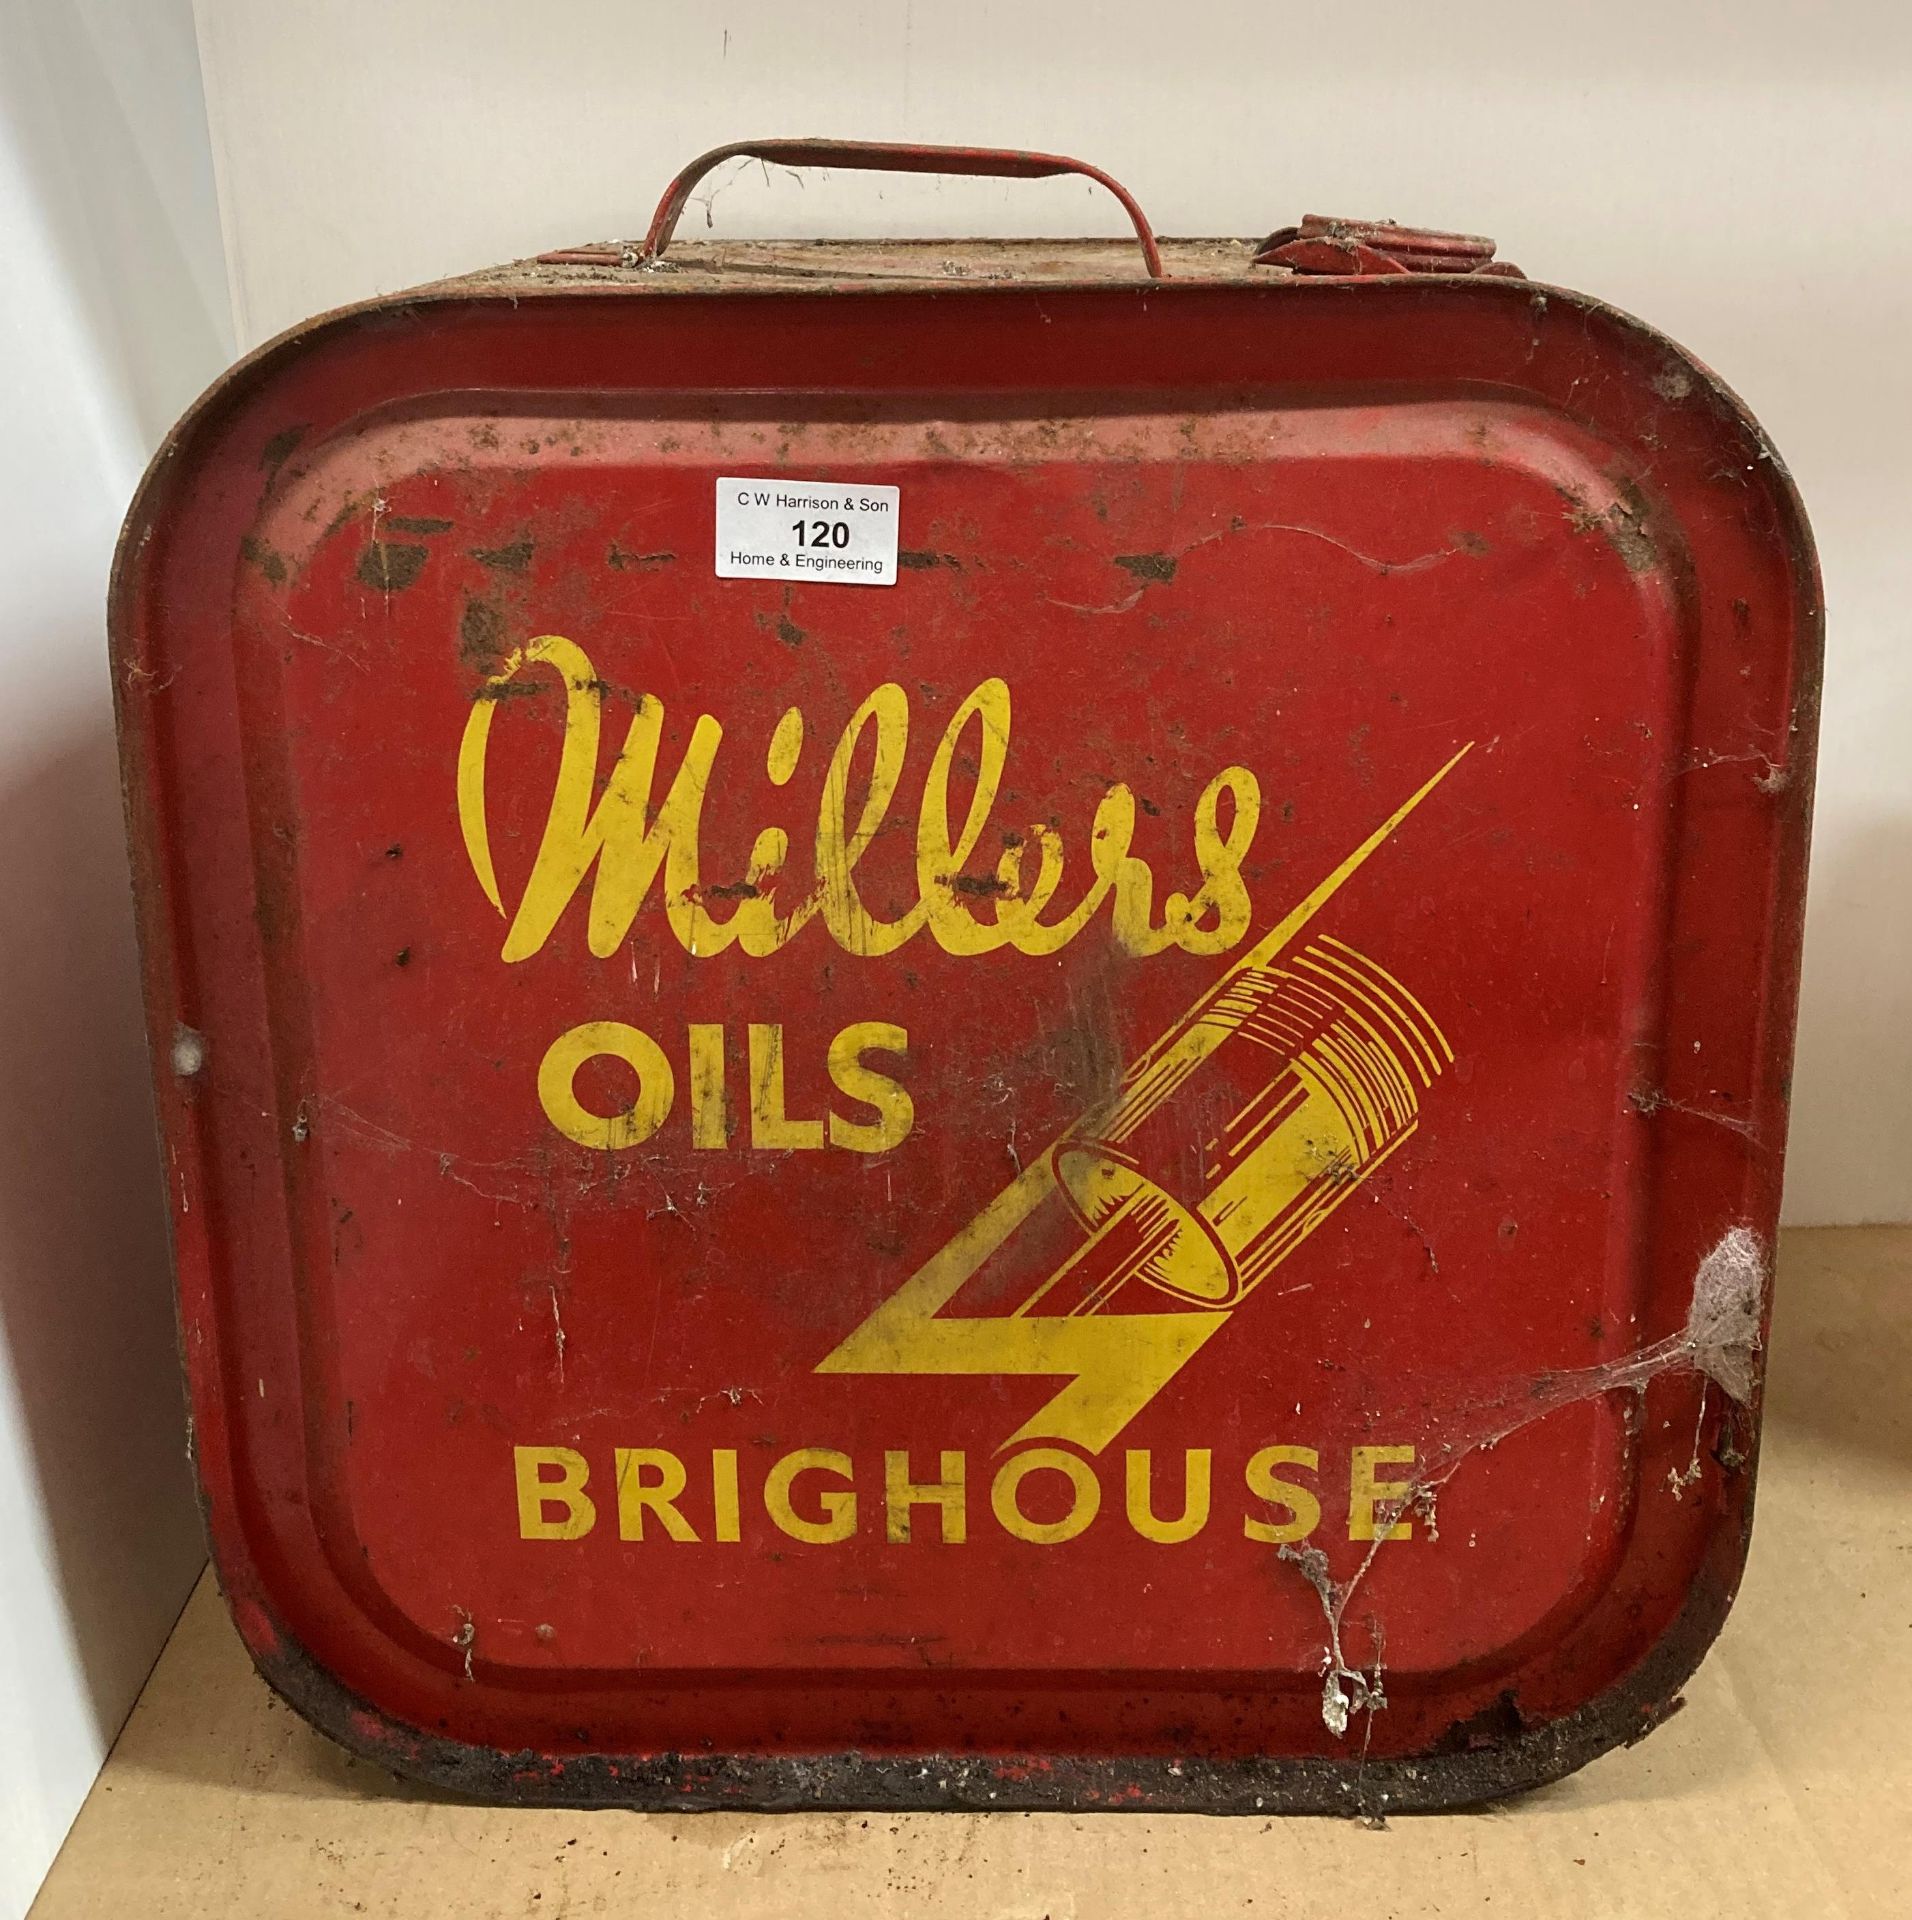 Vintage oil can by Millers Oils Brighthouse (saleroom location: L11)